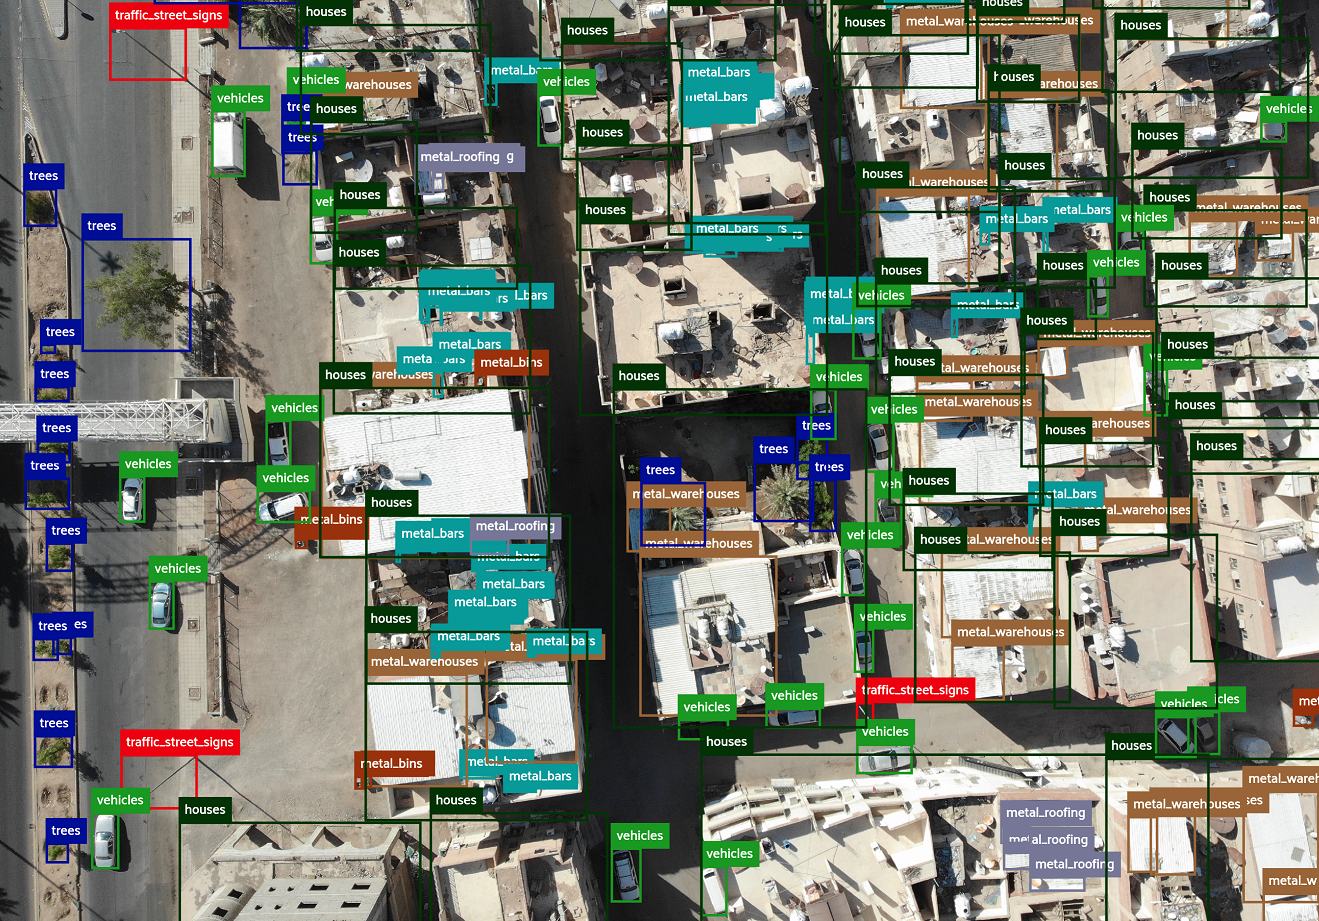 Detected objects in a city area